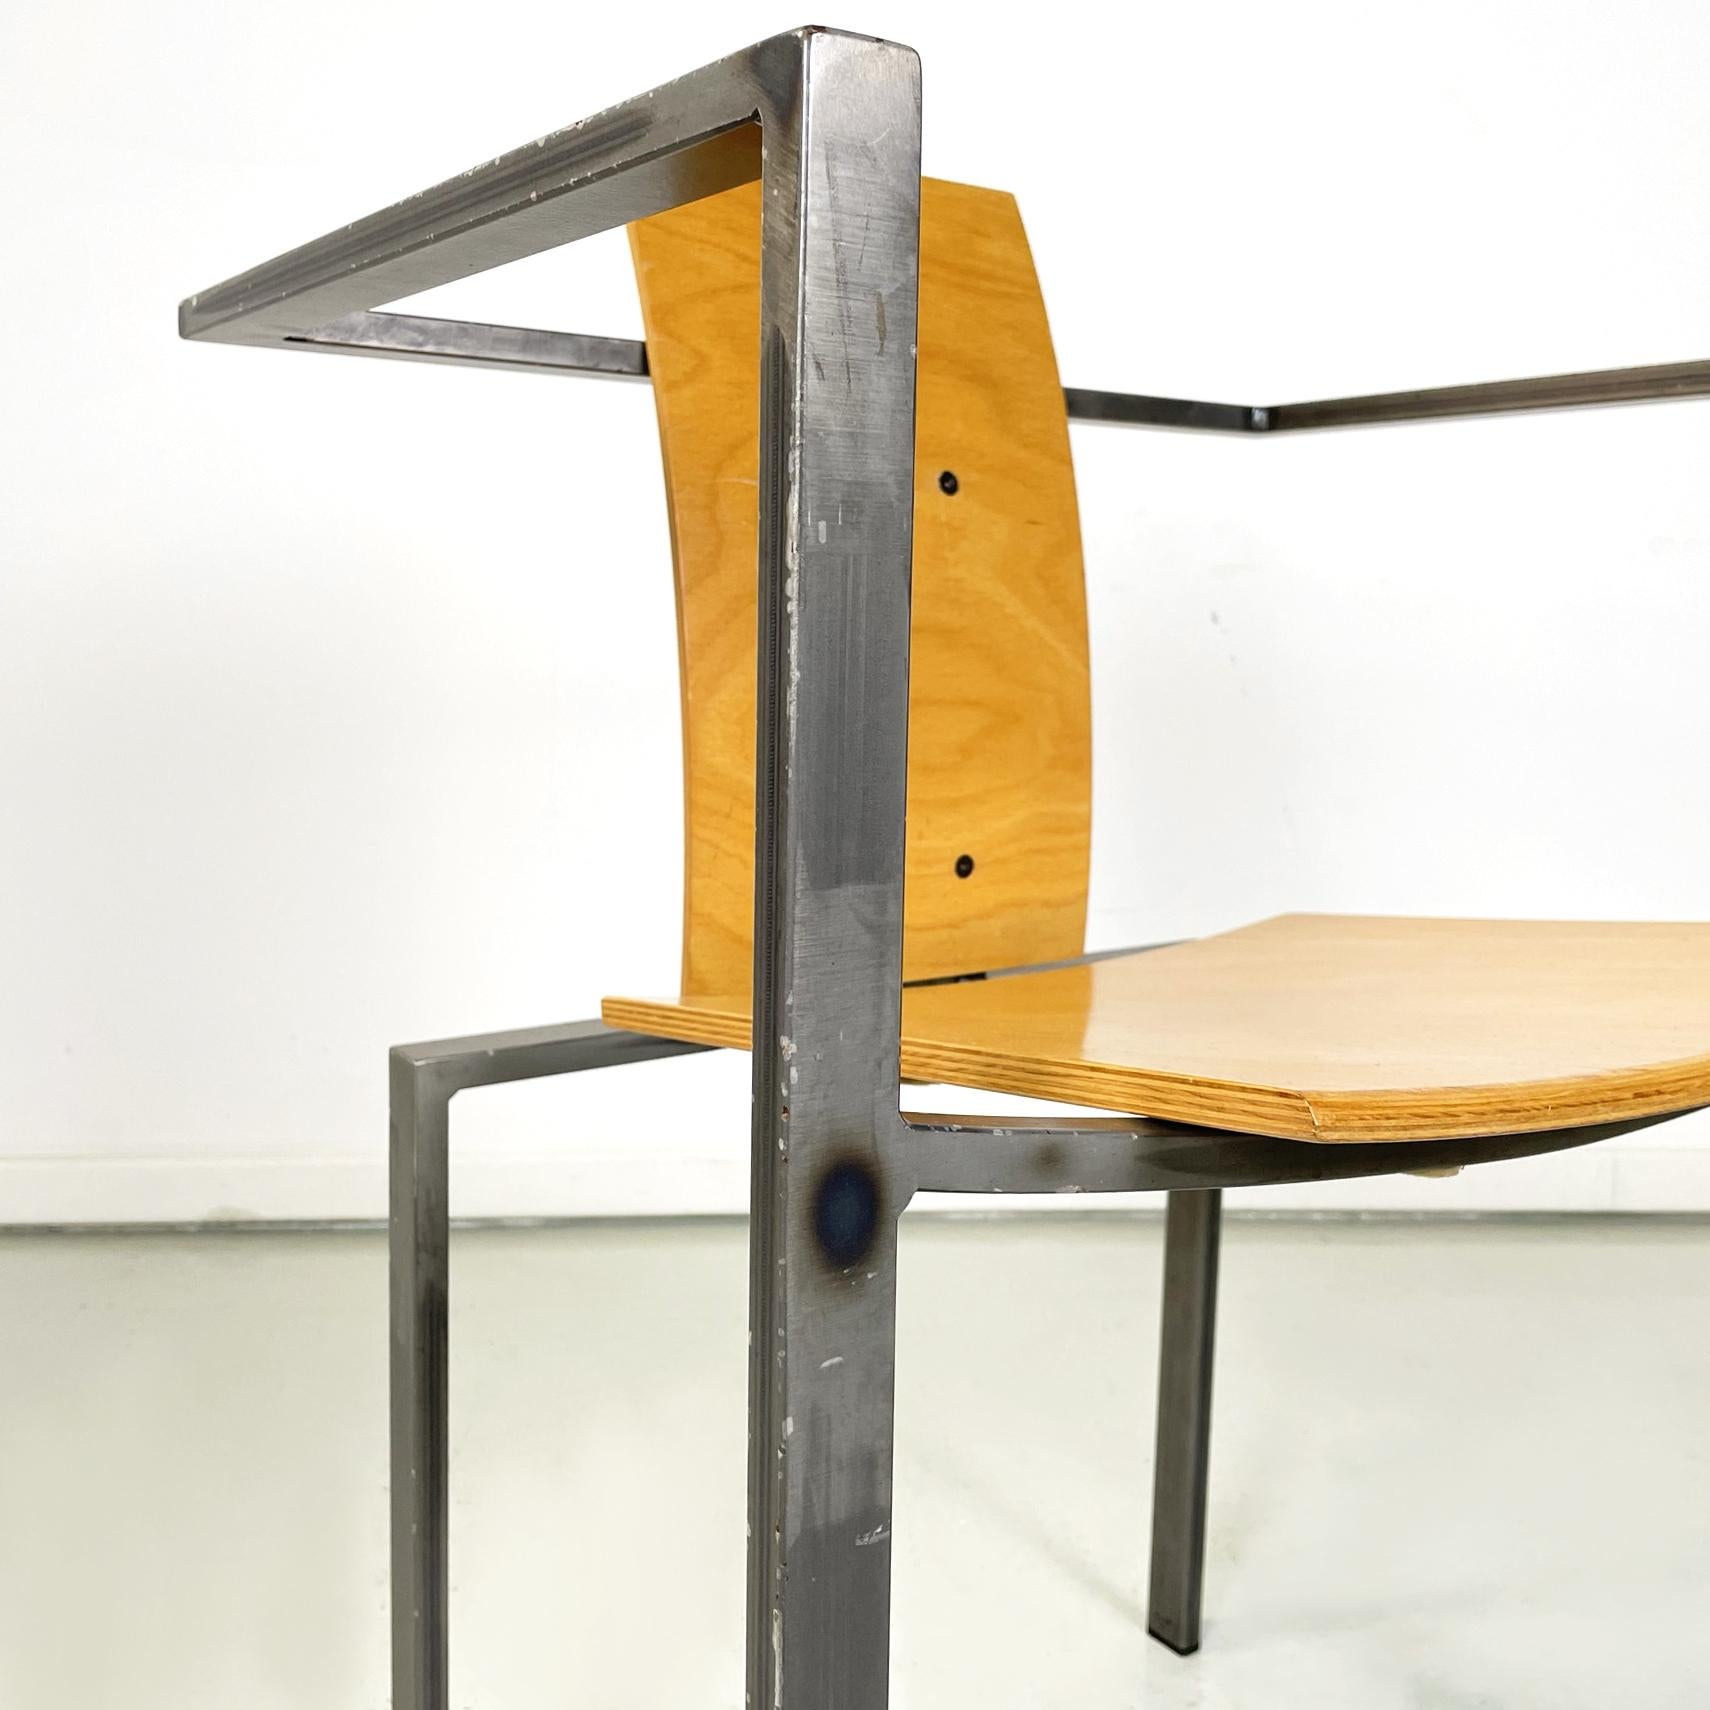 German Modern Squared Chair in Wood and Metal by Karl-Friedrich Foster KKF, 1980 For Sale 9